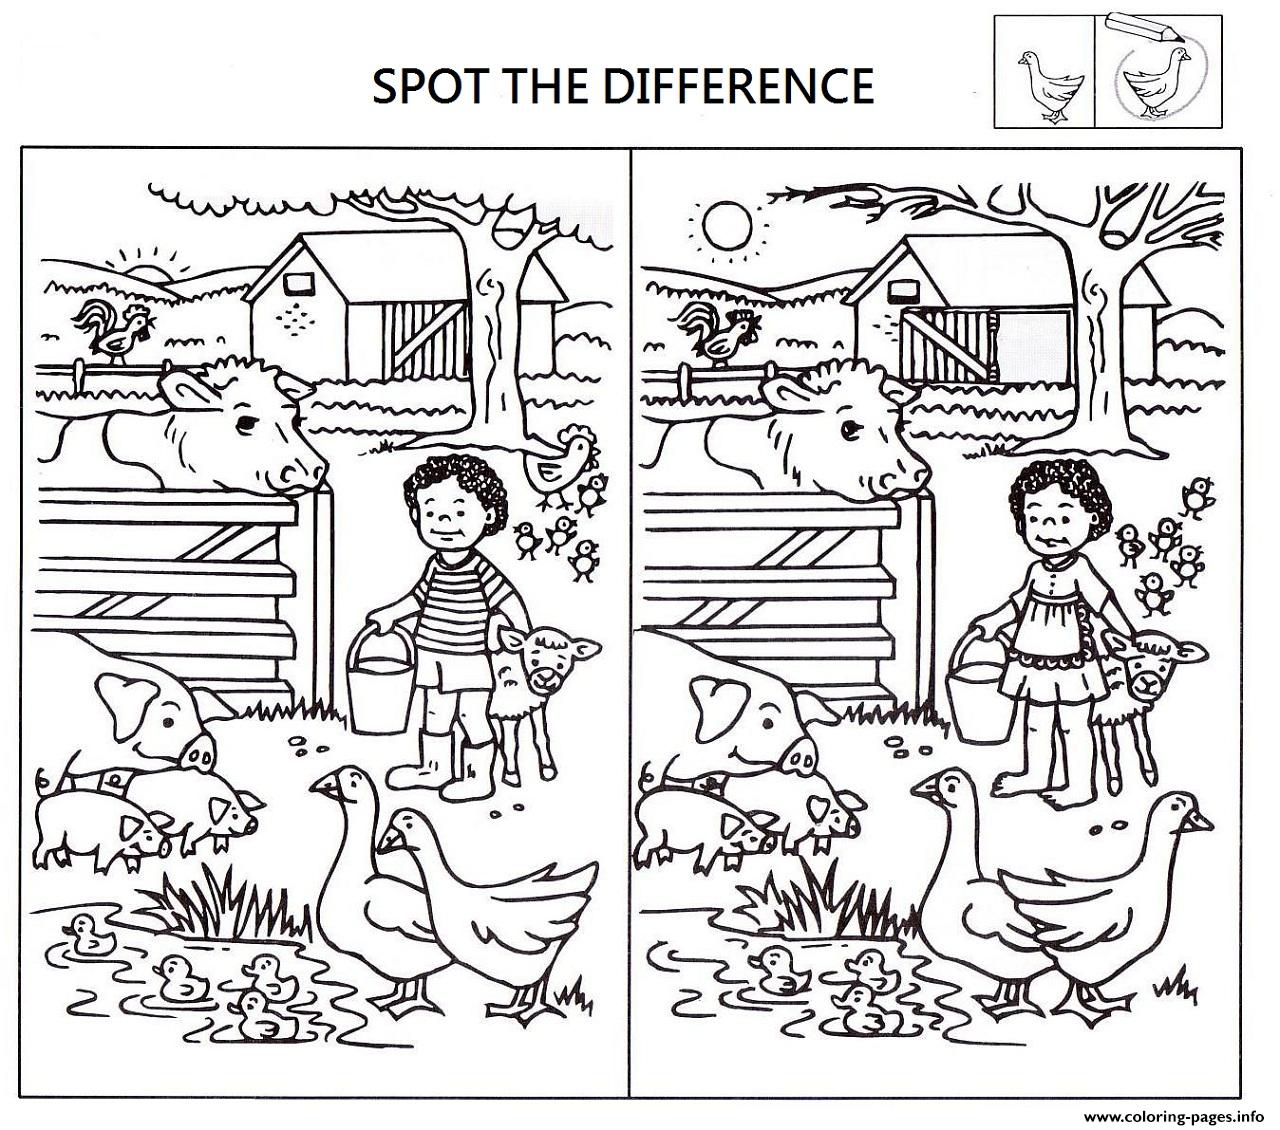 Spot The Difference Worksheets For Kids coloring